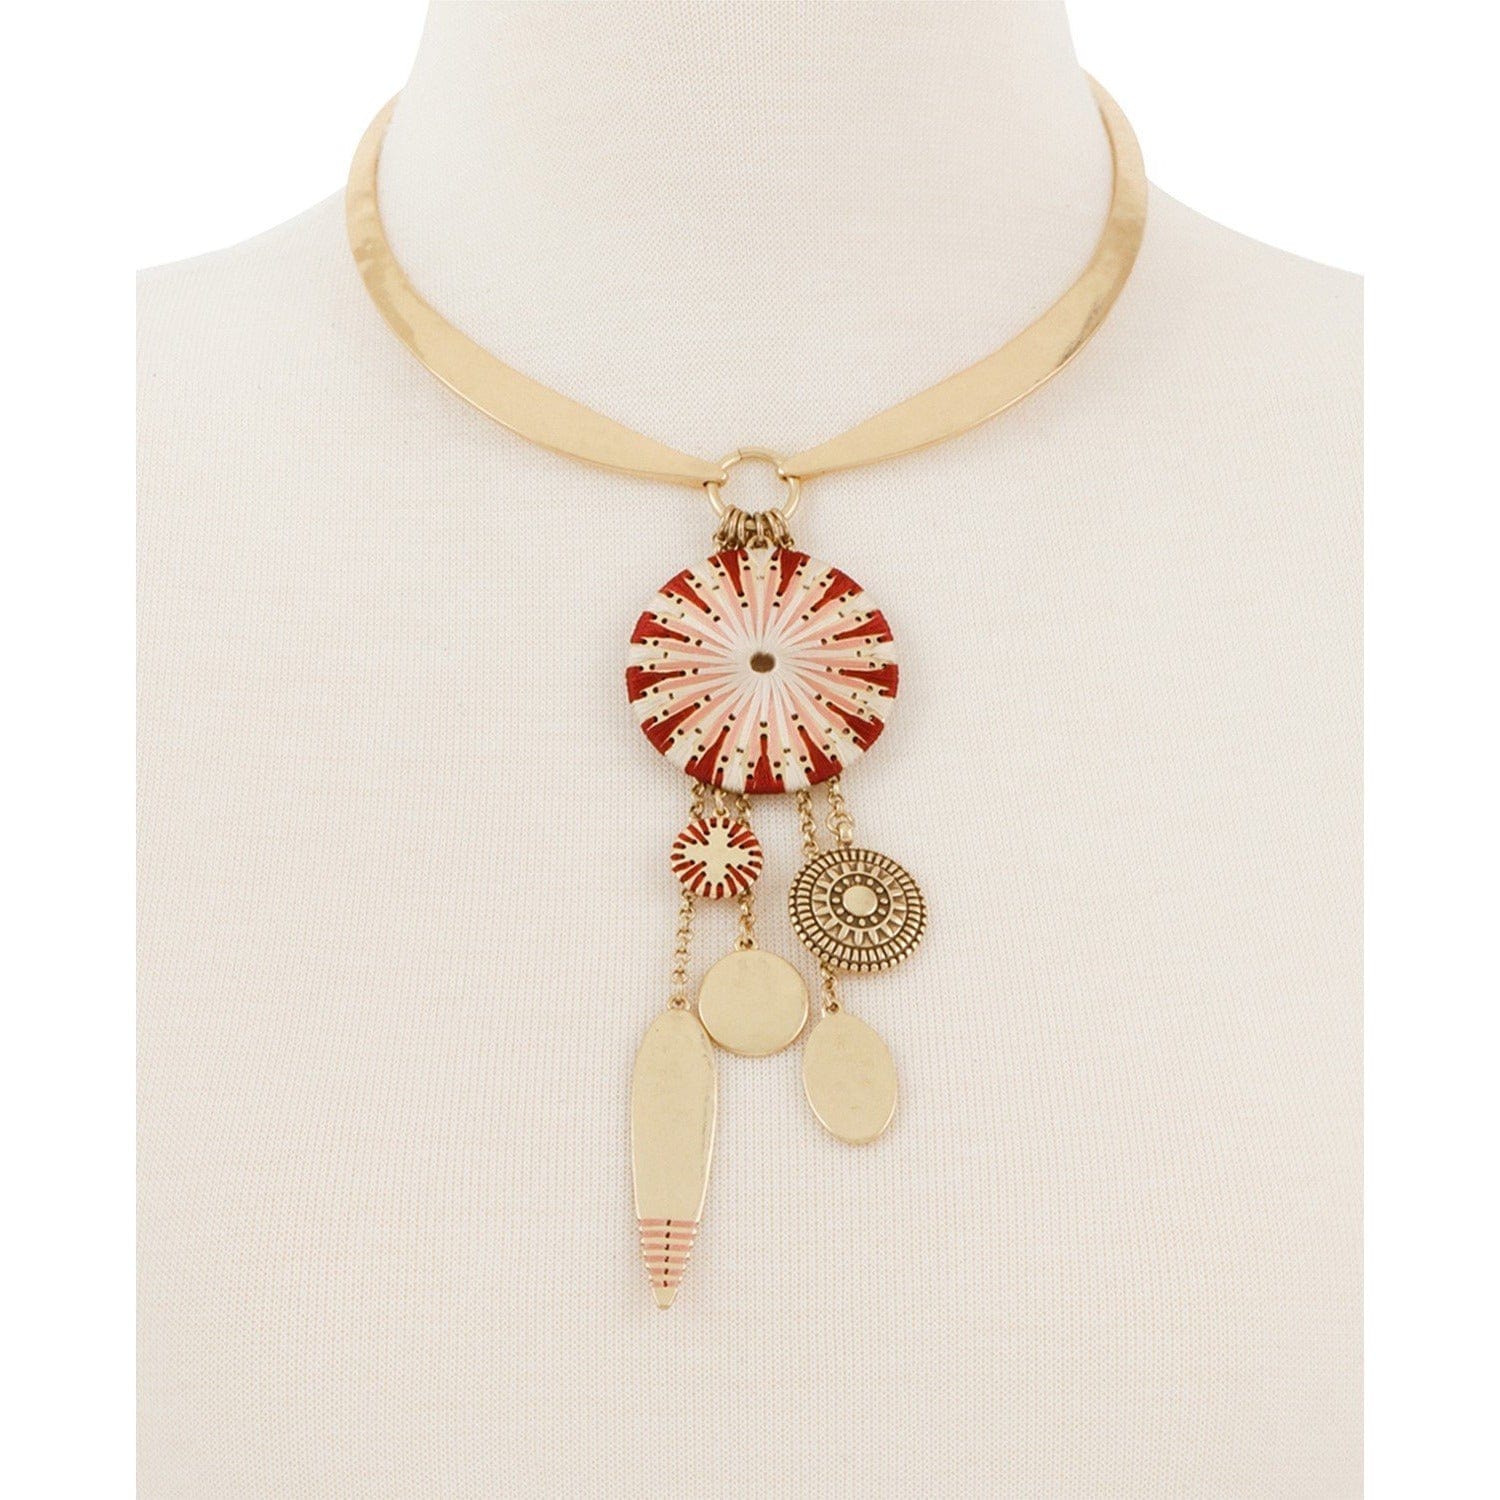 Lucky Brand Gold-Tone Threaded Charm Collar Necklace - The Pink Pigs, A Compassionate Boutique